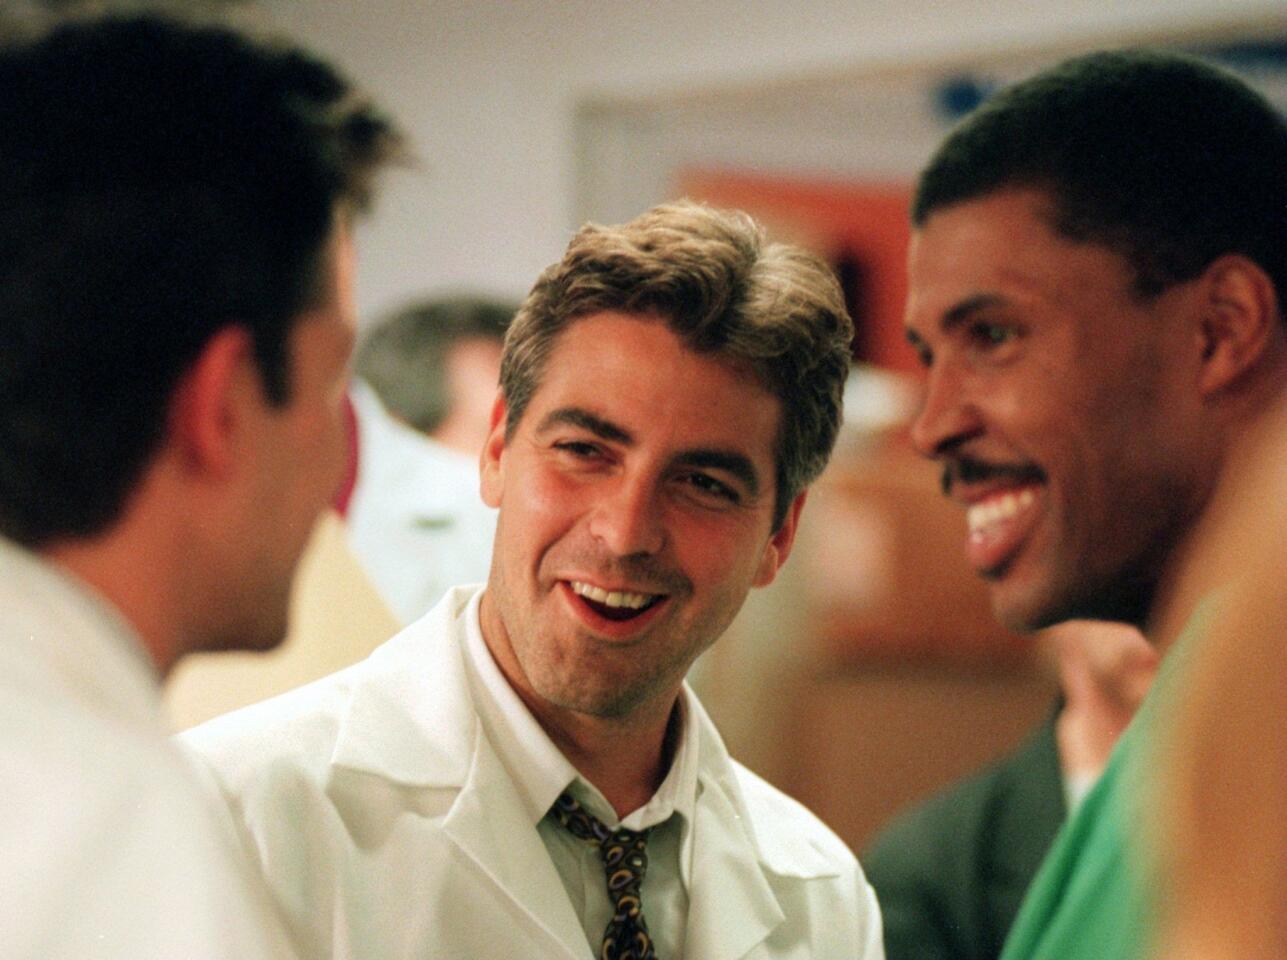 Clooney has his cousin Miguel Ferrer to thank for giving him his first mini-role in Ferrer's horse racing film "And They're Off." Nearly 10 years later, Clooney landed his breakout TV role as seasoned pediatrician and expert womanizer Dr. Doug Ross on "ER."